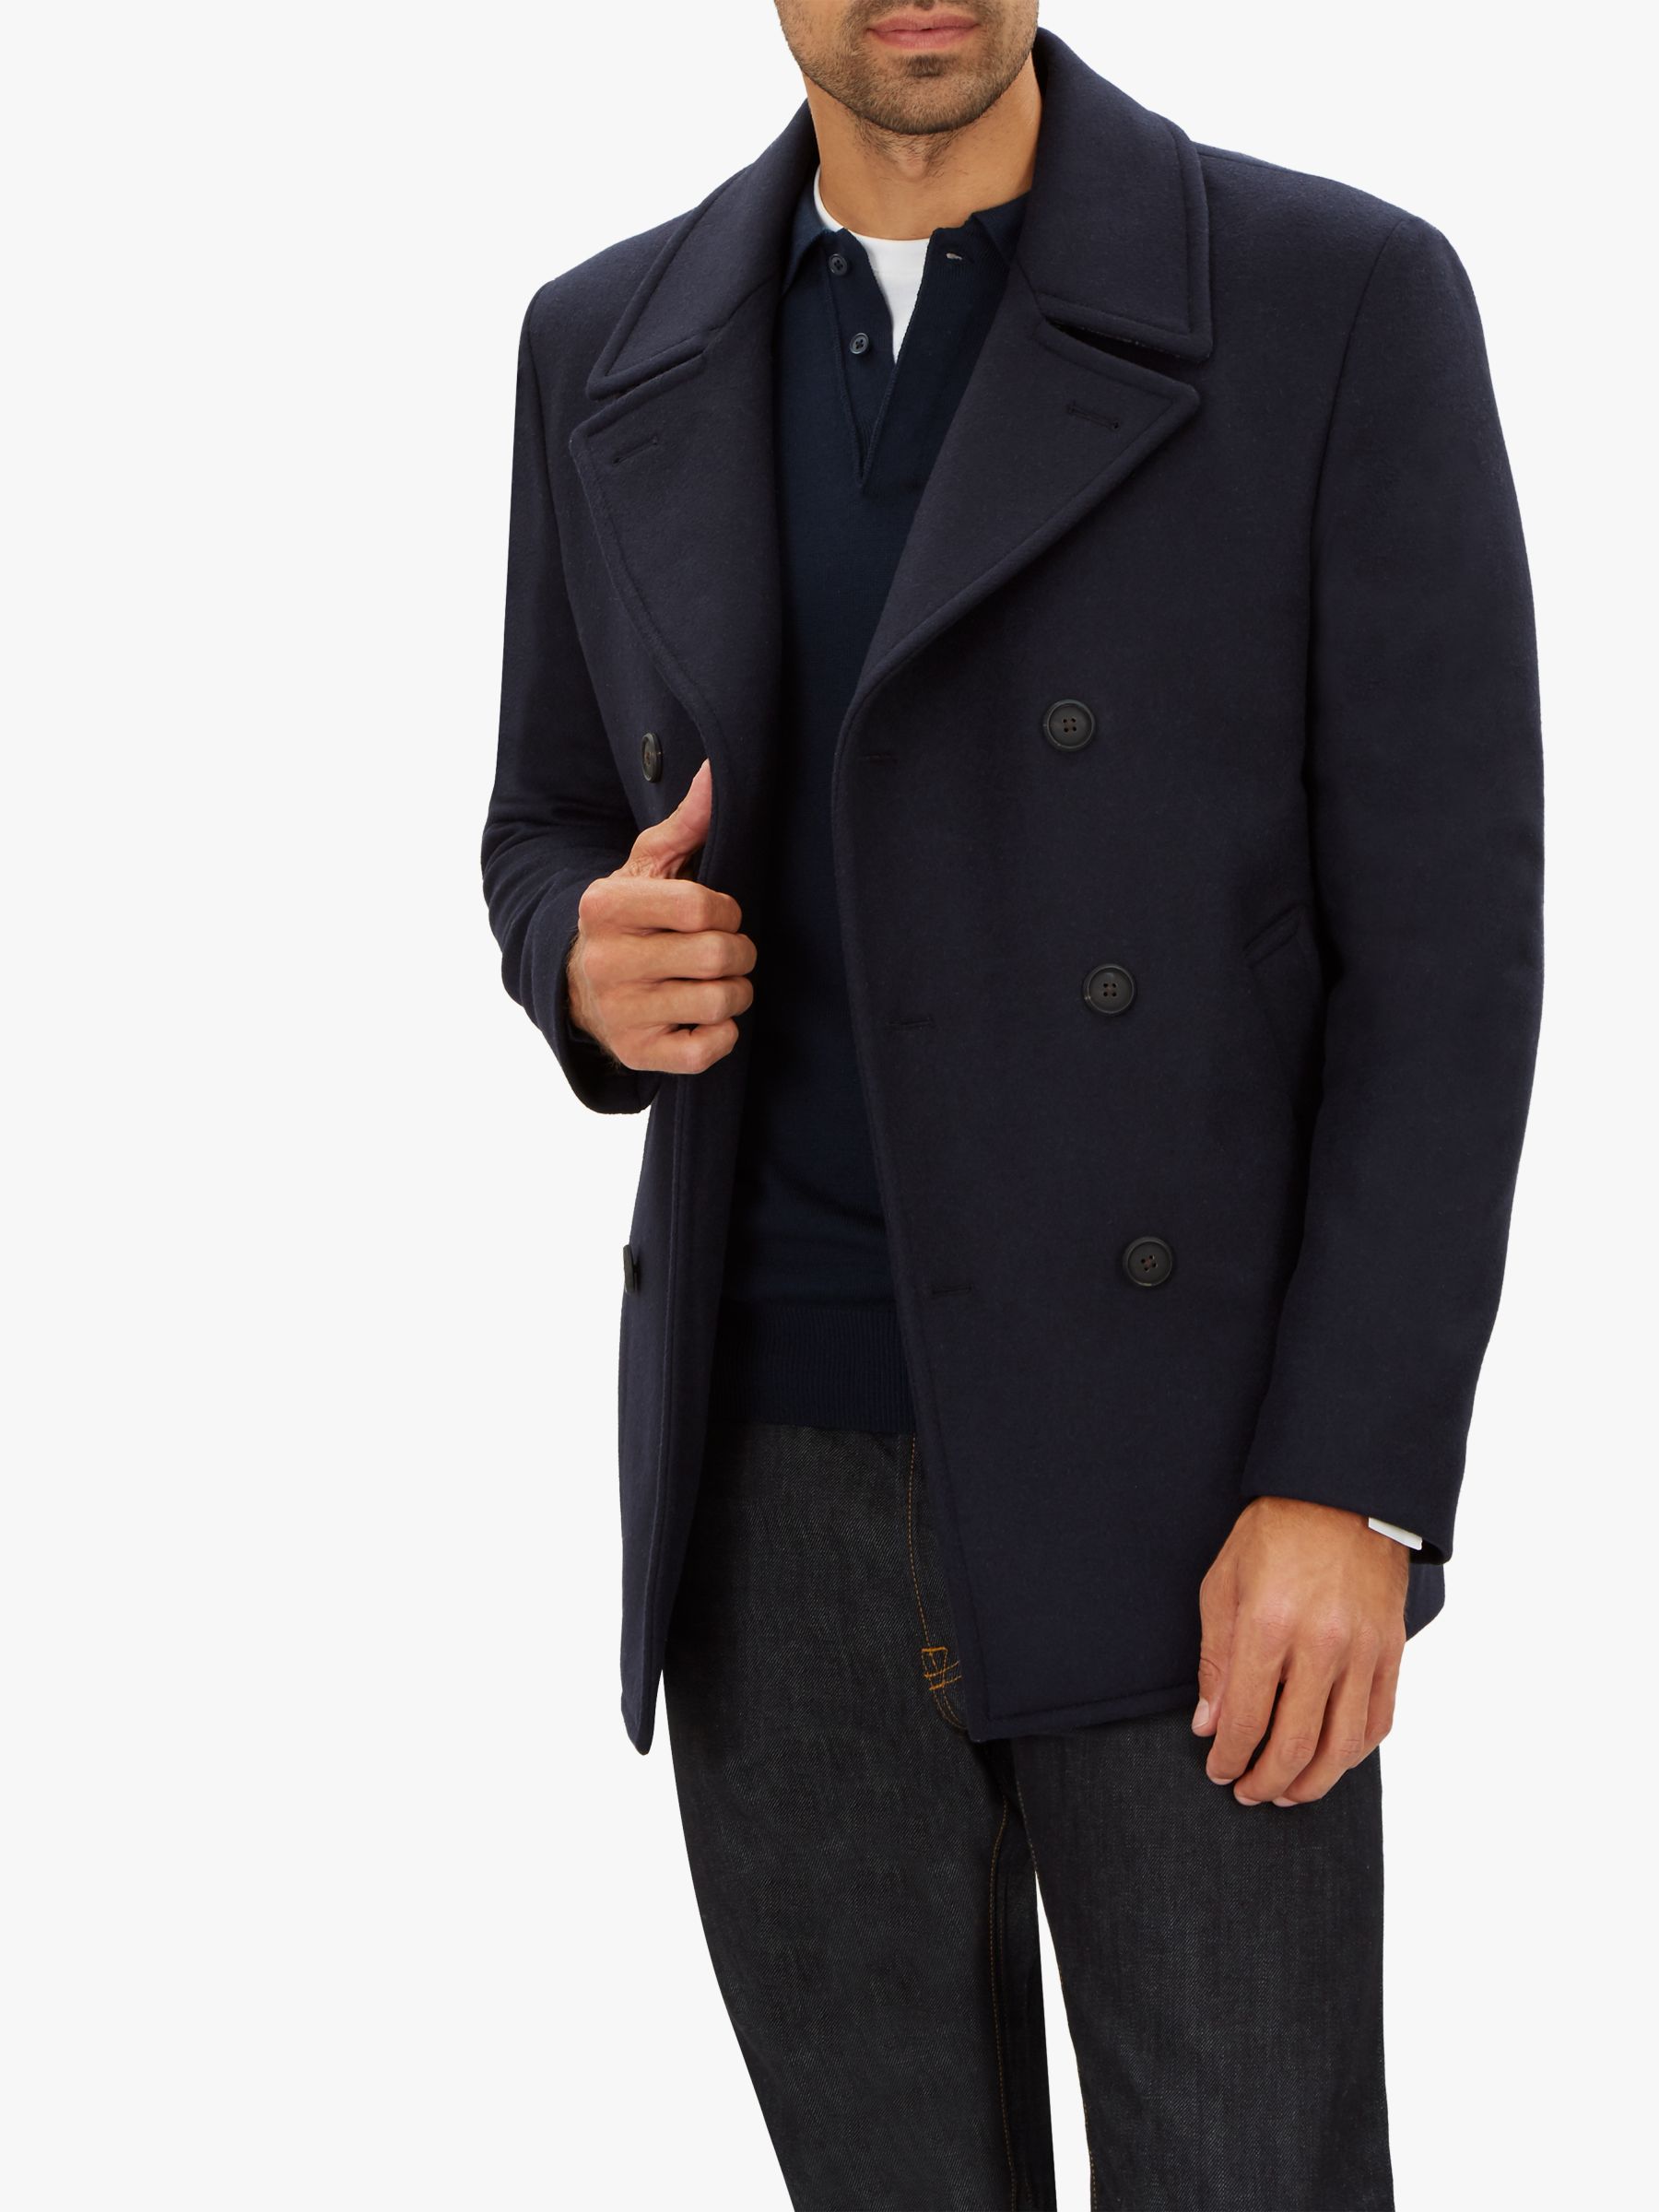 Jaeger Double Face Check Peacoat, Navy